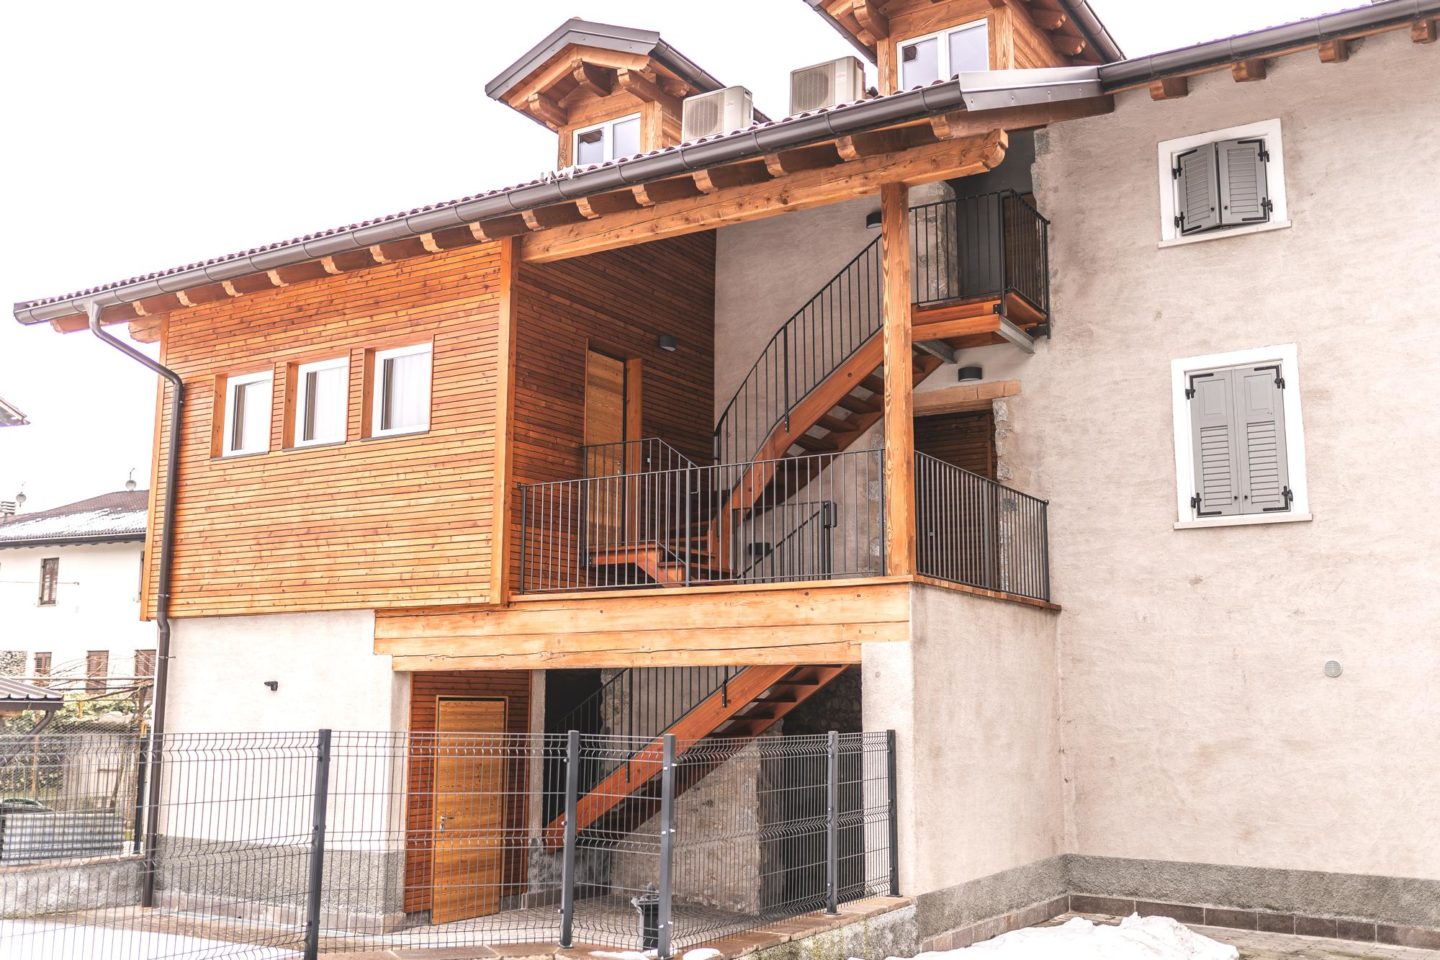 Holiday apartments in Trentino